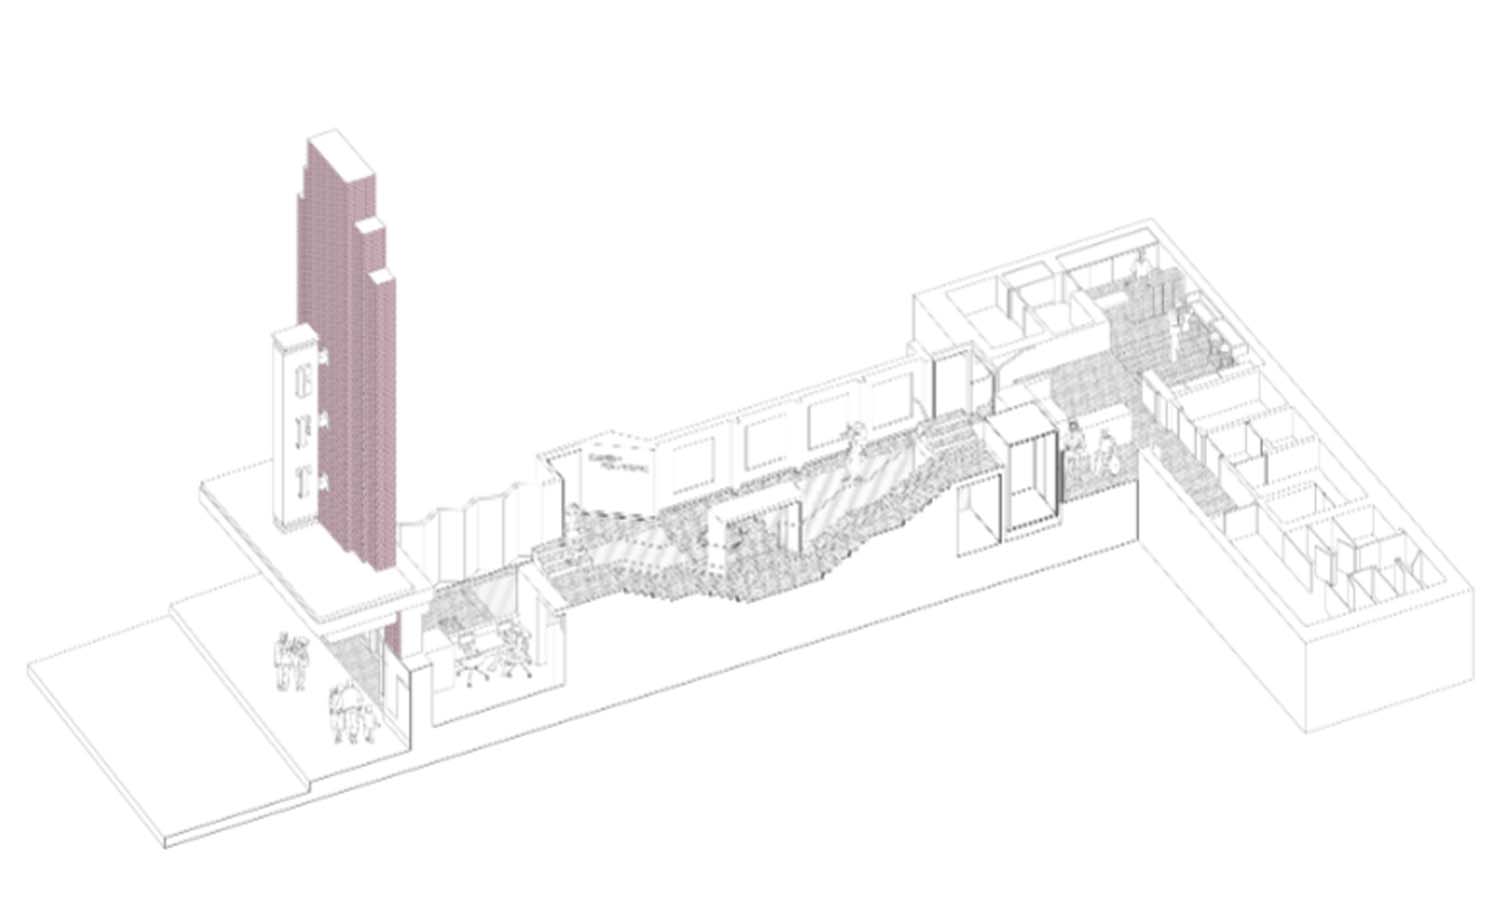 An architectural drawing of Glasgow Film Theatre the main part of the image is black and white with a key section highlighted in a warm red colour